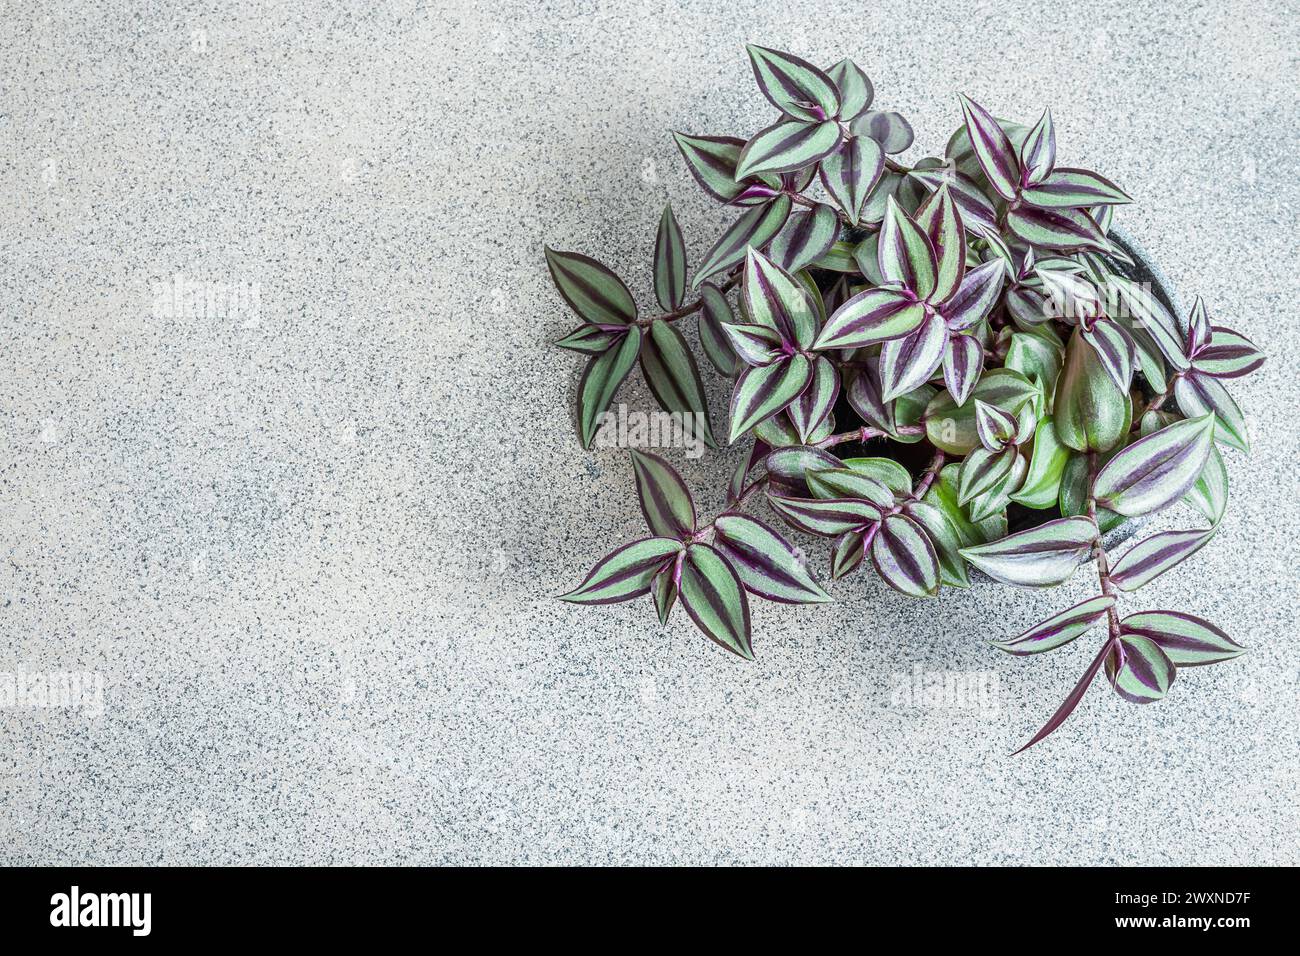 Home plant Tradescantia zebrina on a gray background, top view with copy space Stock Photo